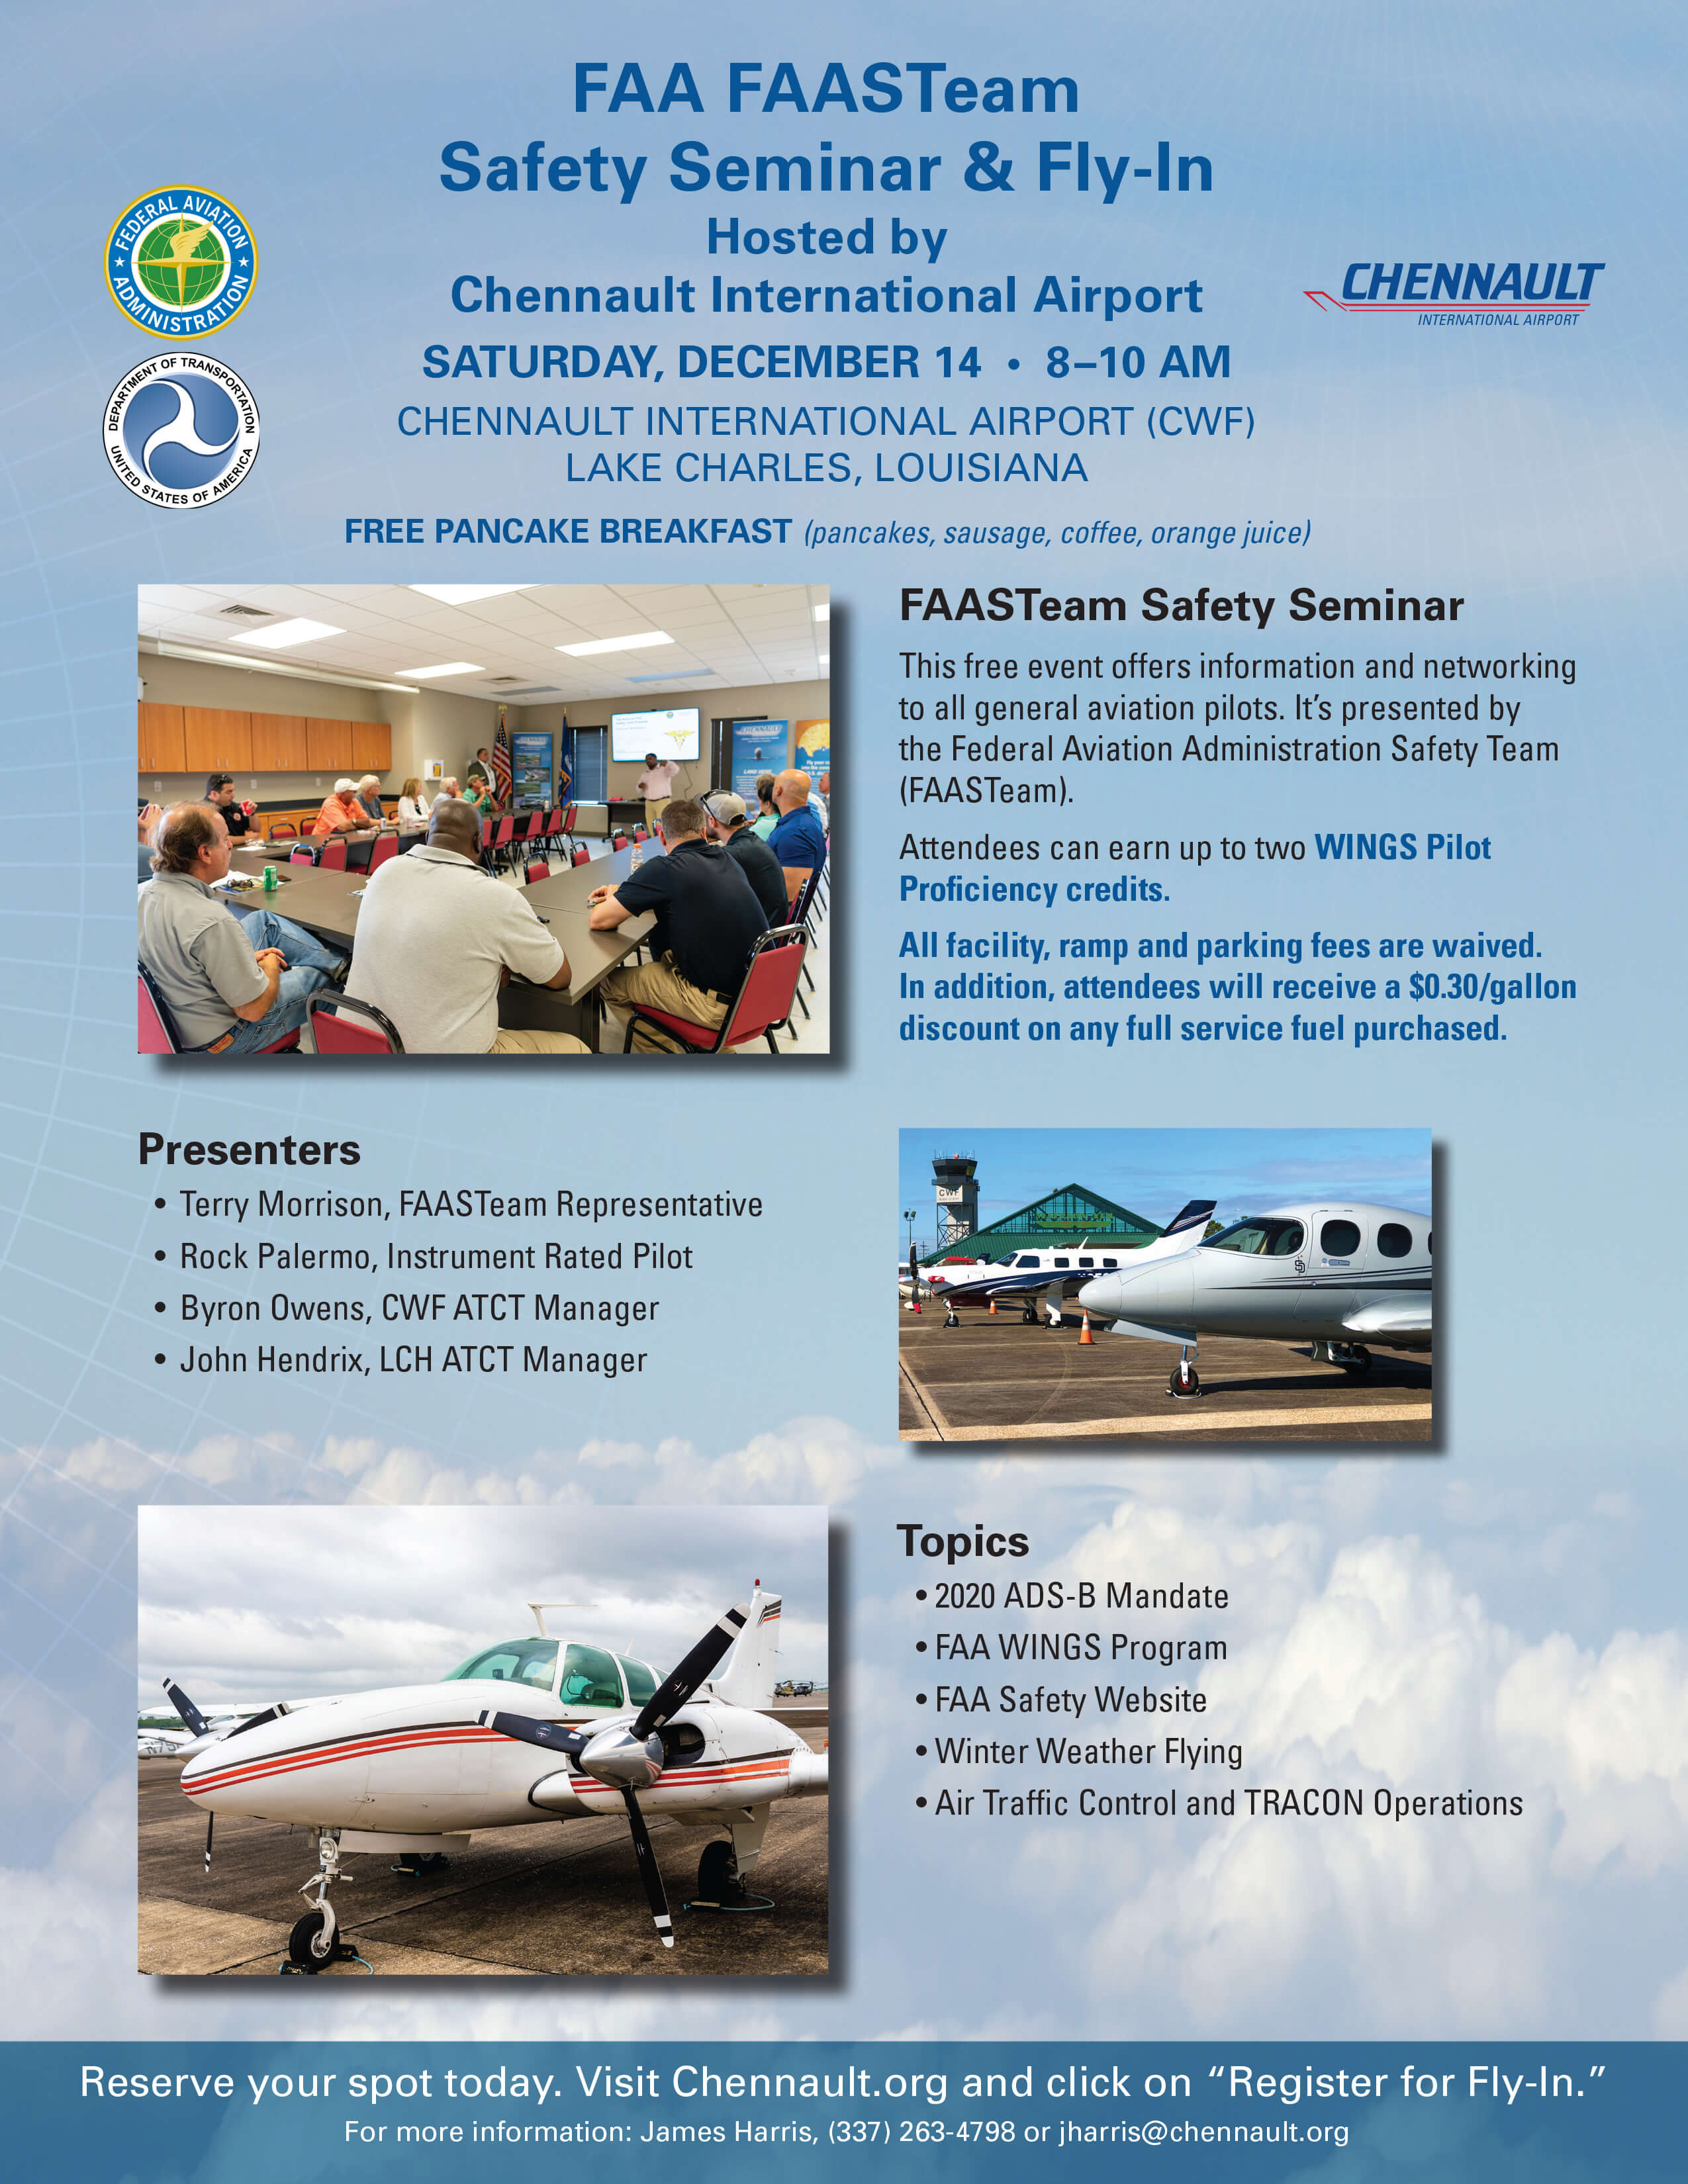 FAA FAASTeam Safety Seminar & Fly-In hosted by Chennault International Airport flyer